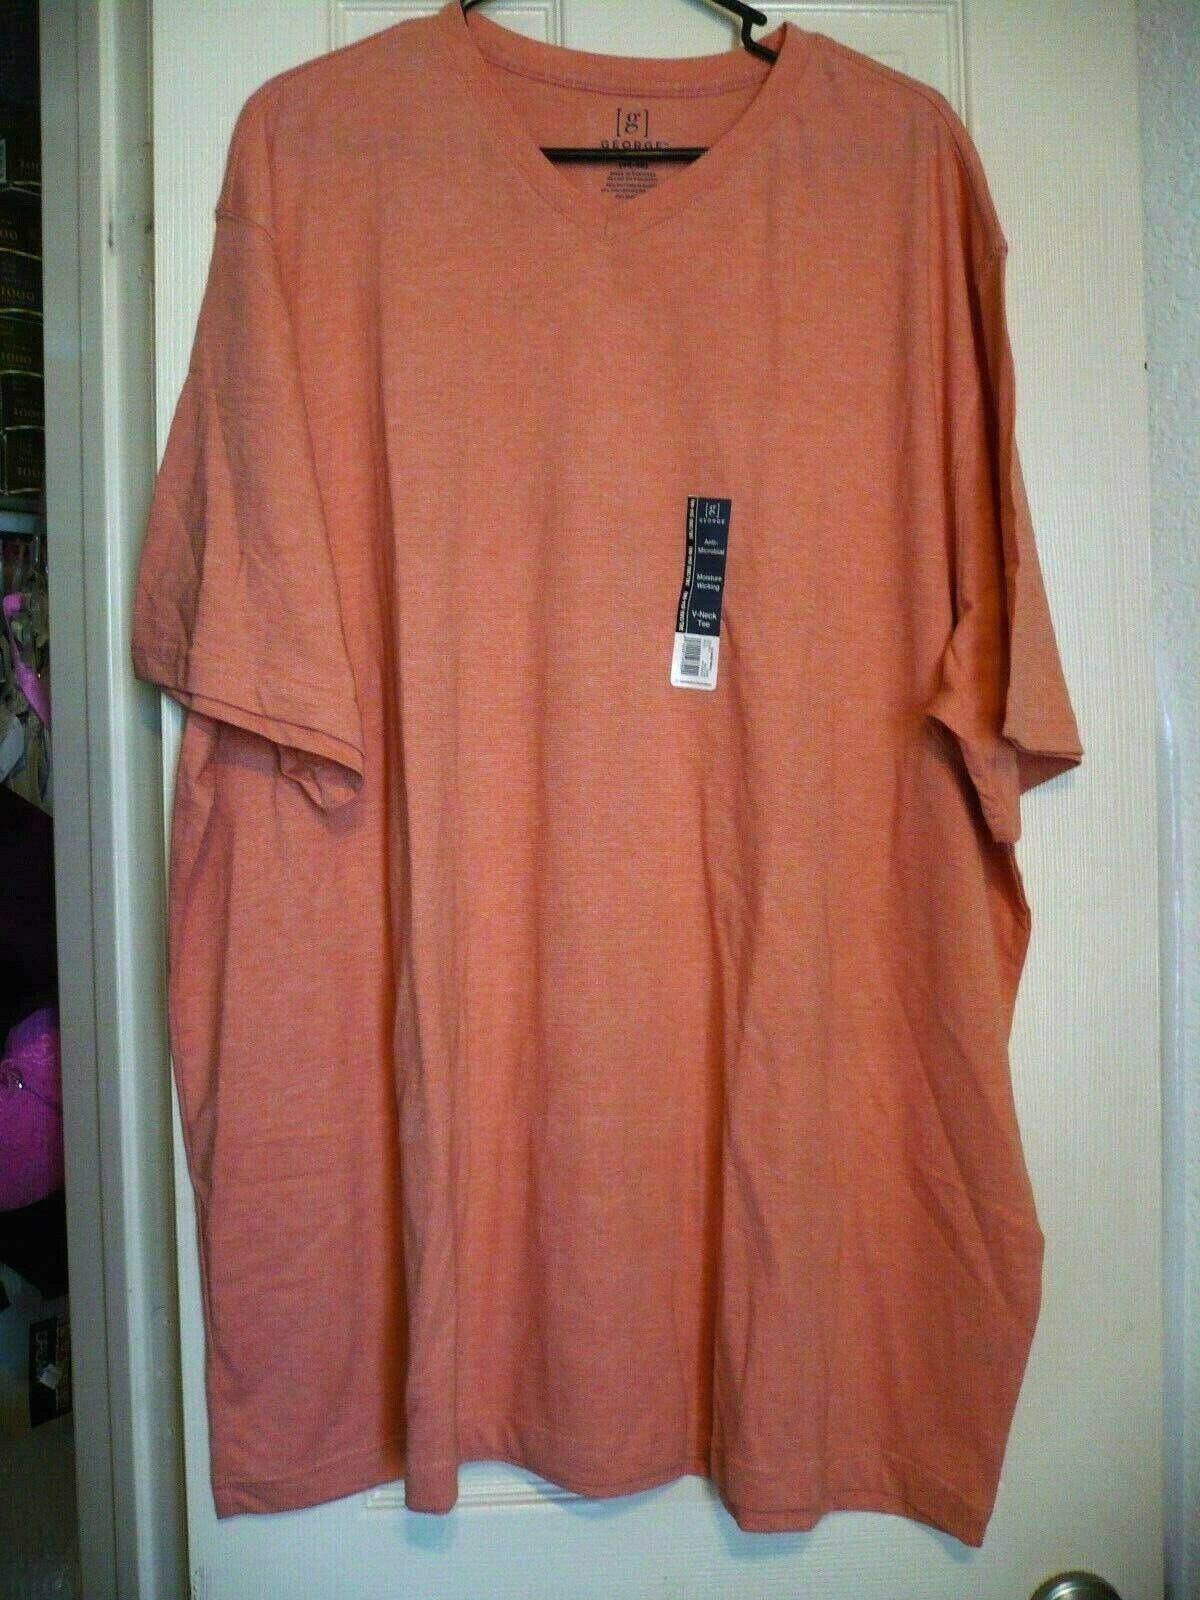 George Men's Short Sleeve Jersey V-Neck Tee Shirt Size Large 42-44 Coral Reef - $10.73